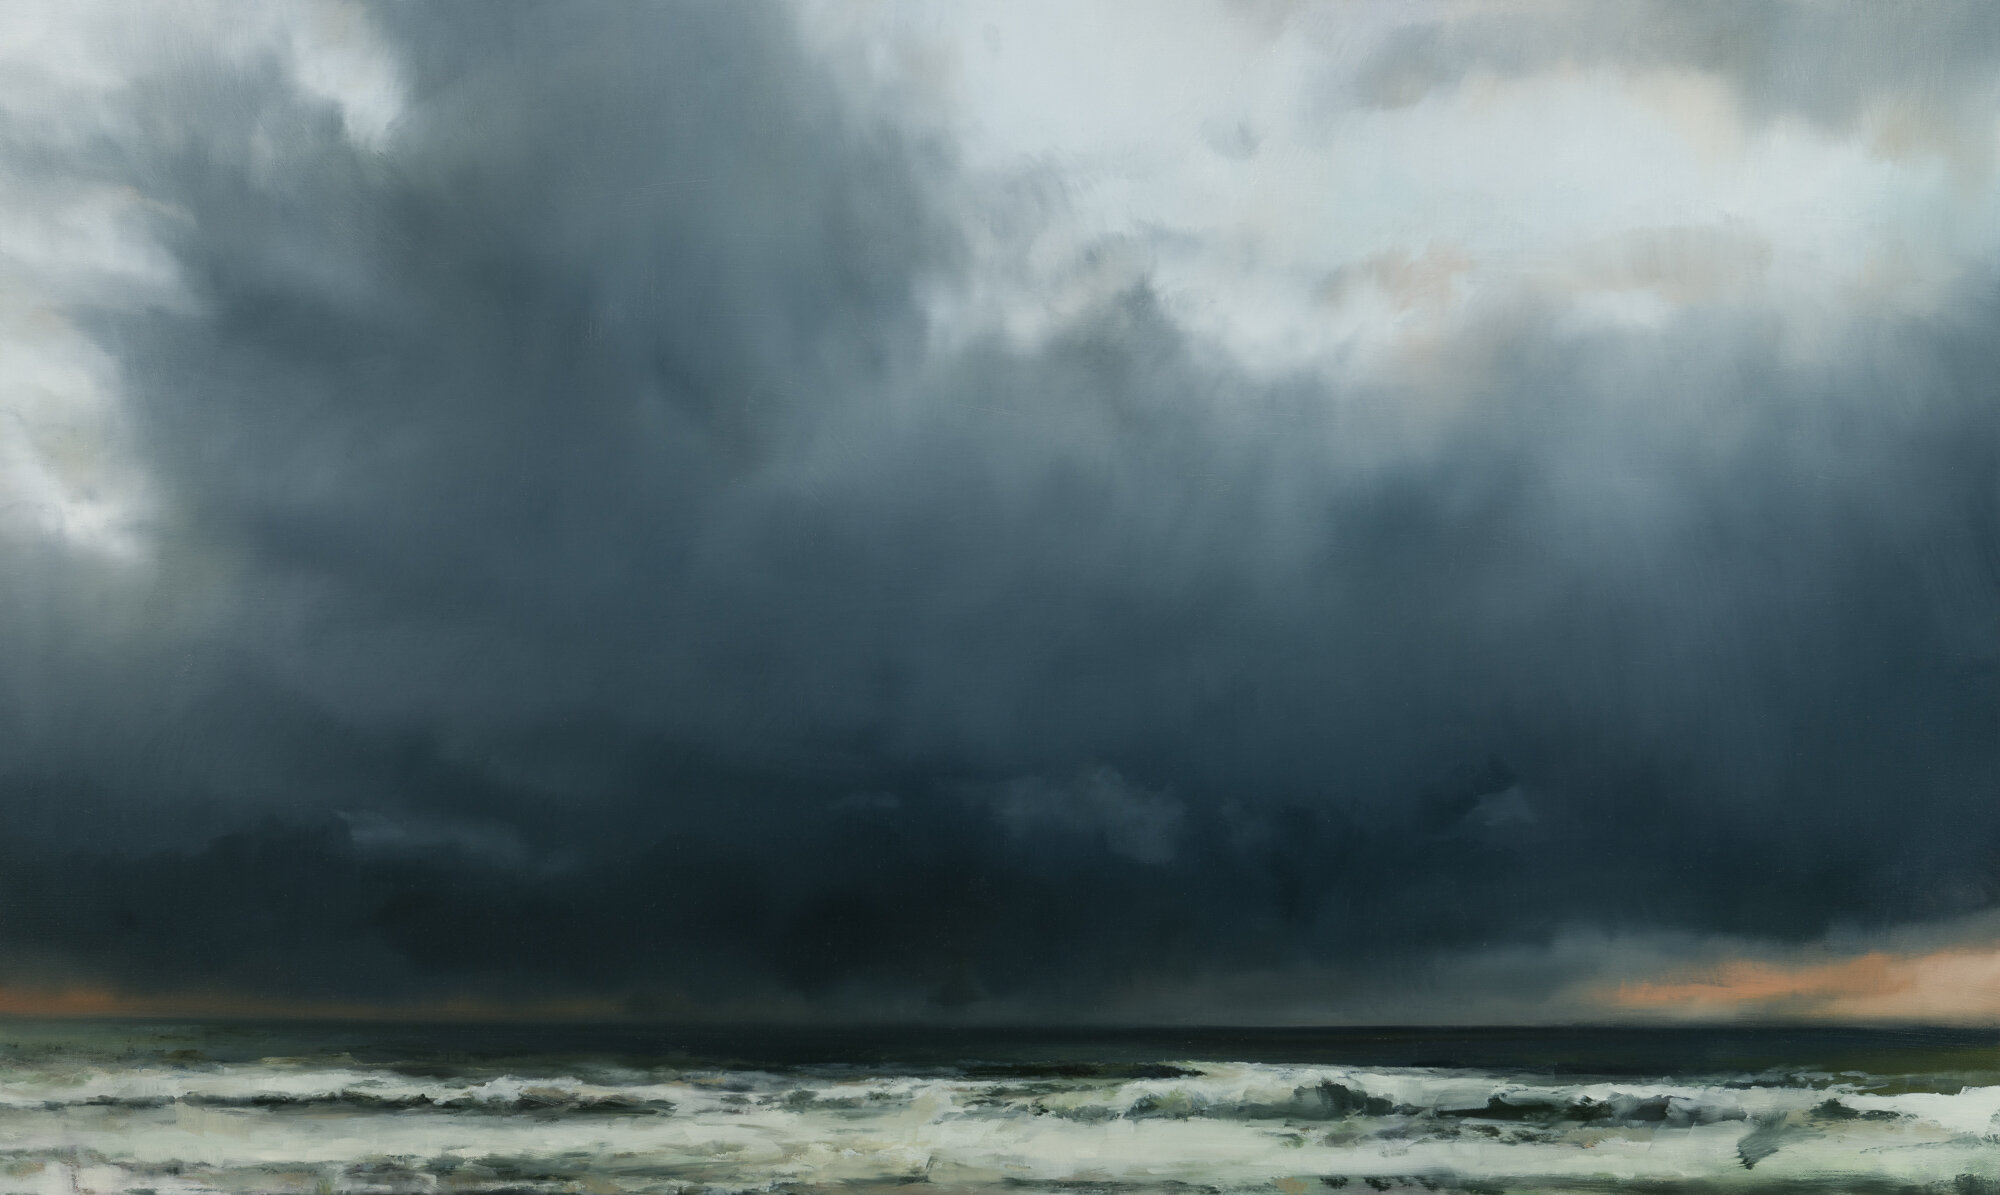   pacific storm •   30" x 50"  oil on canvas  2019   